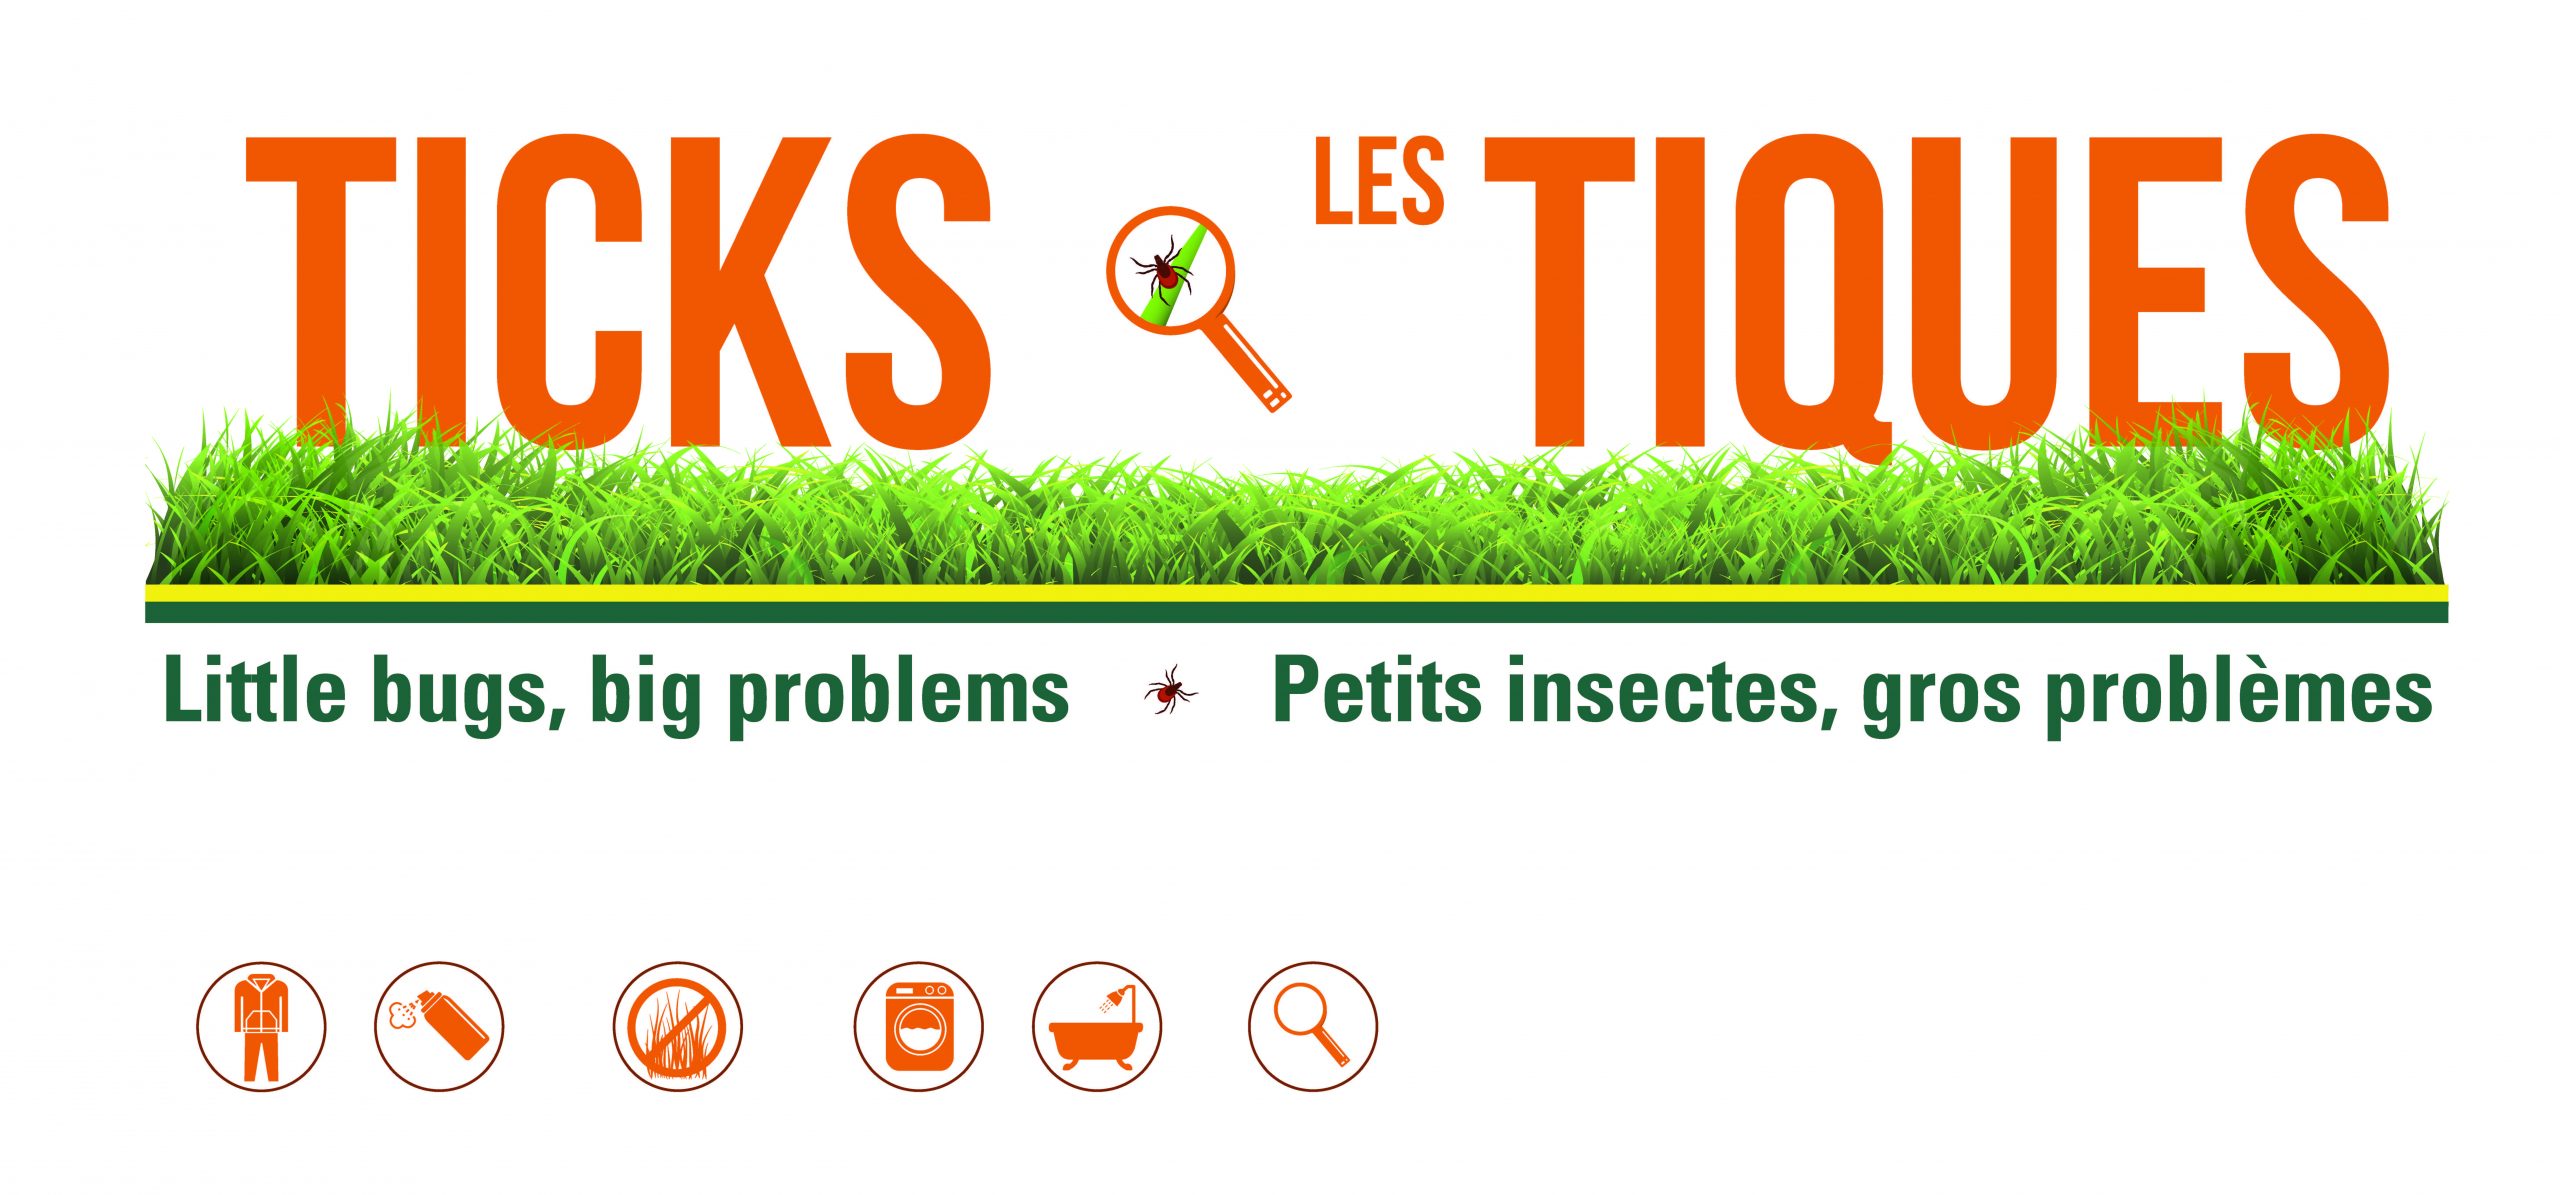 Illustration of a tick and grass with text Ticks Little Bugs, Big Problems